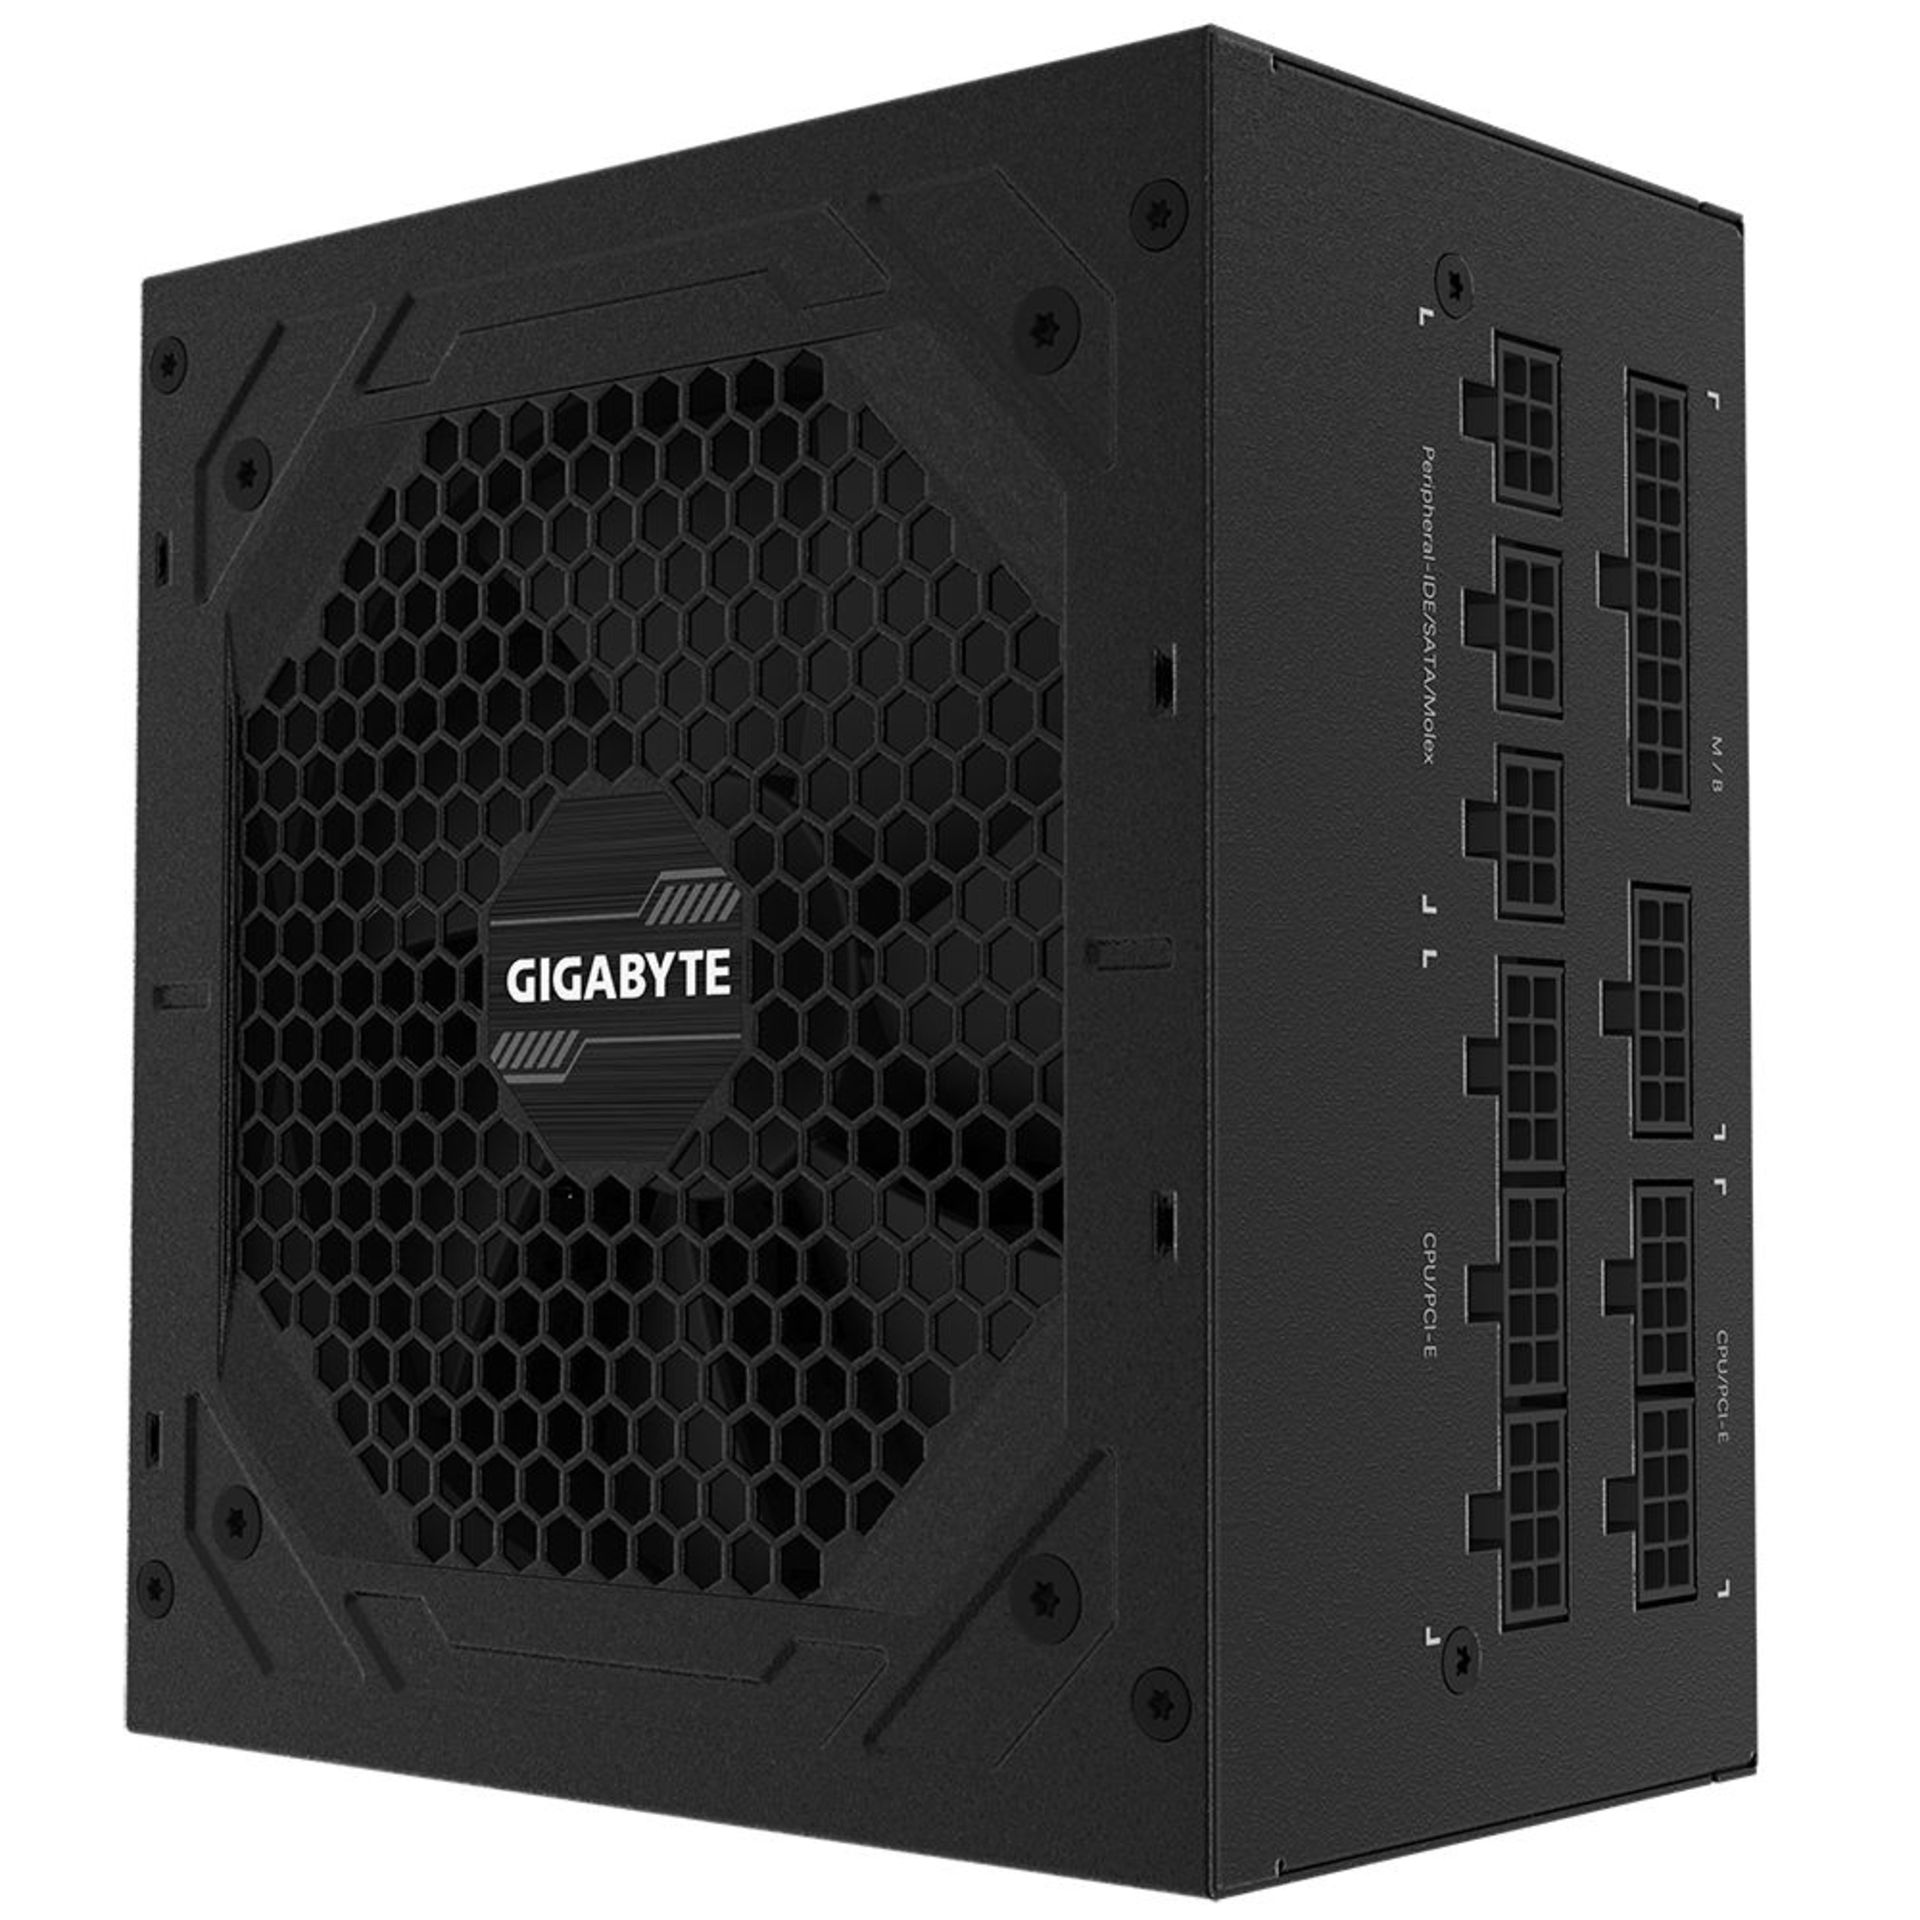 Gigabyte P750GM Power Supply. - P4. RRP £200.99. 80 Plus Gold certified ensures to deliver 90%